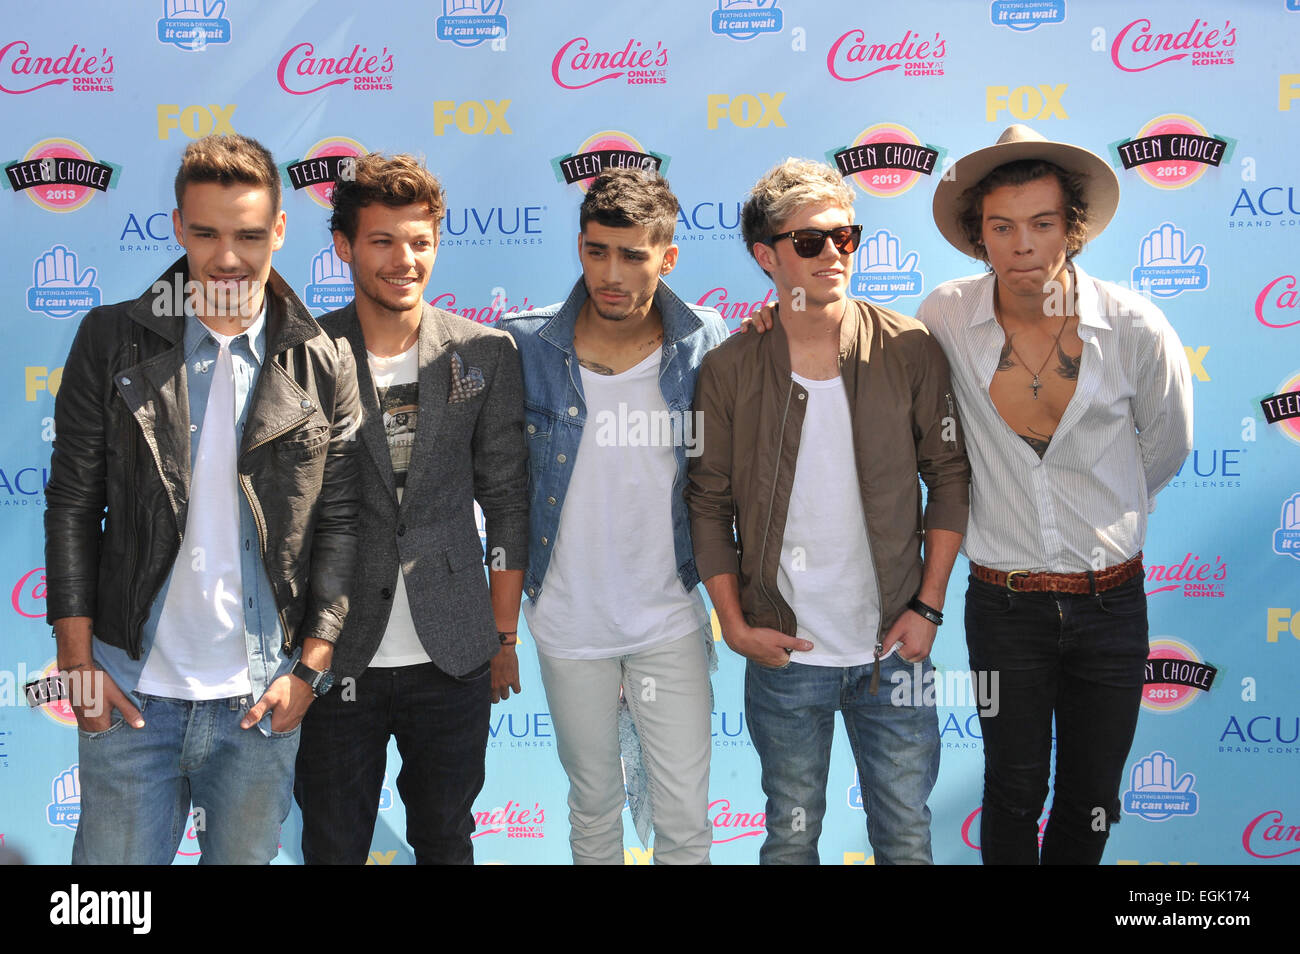 LOS ANGELES, CA - AUGUST 11, 2013: Pop group One Direction - Liam Payne, Louis Tomlinson, Zayn Malik, Niall Horan & Harry Styles - at the 2013 Teen Choice Awards at the Gibson Amphitheatre, Universal City, Hollywood. Stock Photo